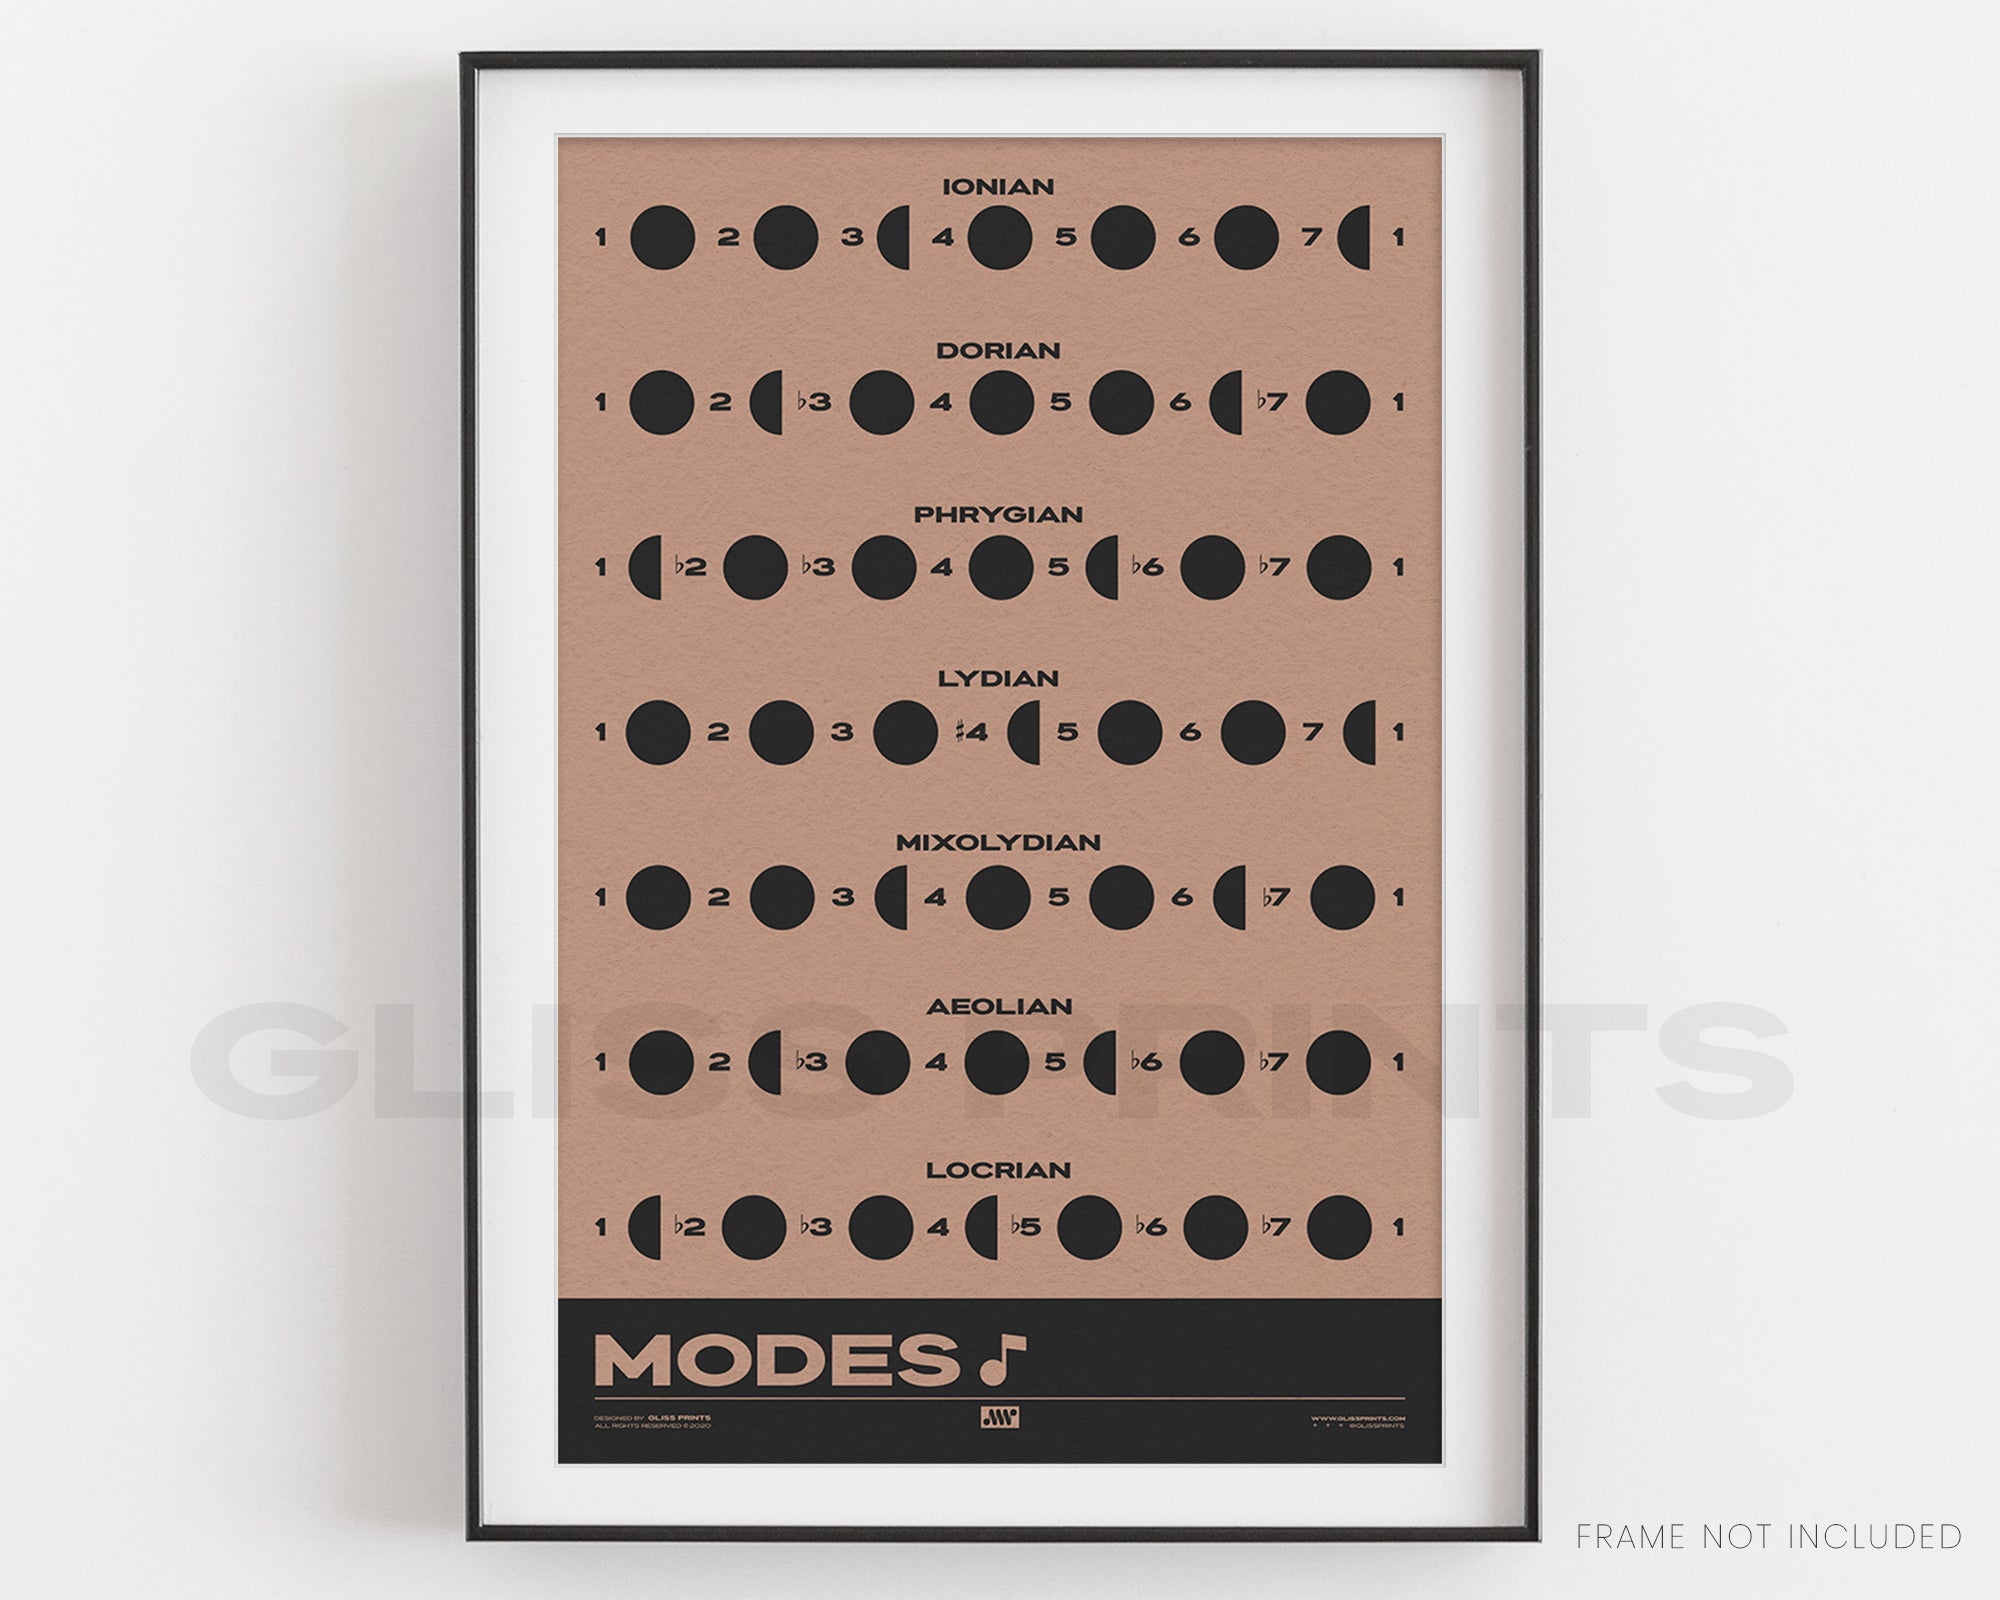 Music Modes Poster, Pink